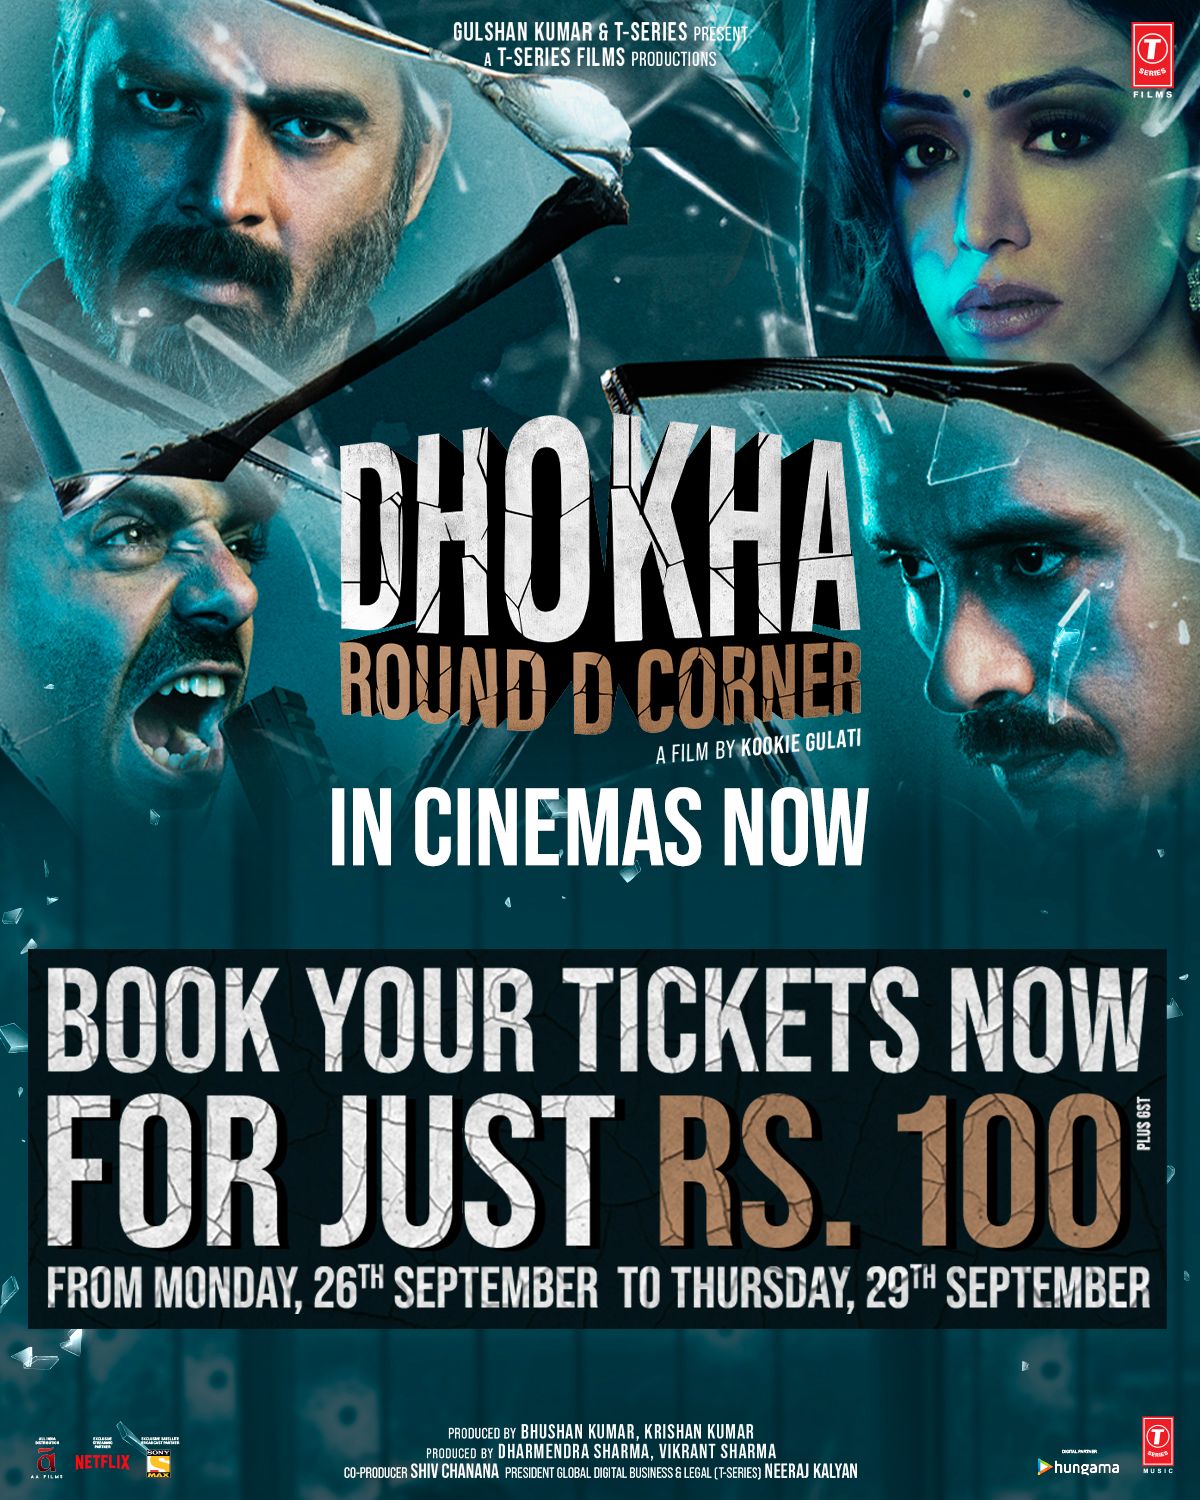 With a positive start at the box office, Dhokha Round D Corner promises a profitable investment for the makers